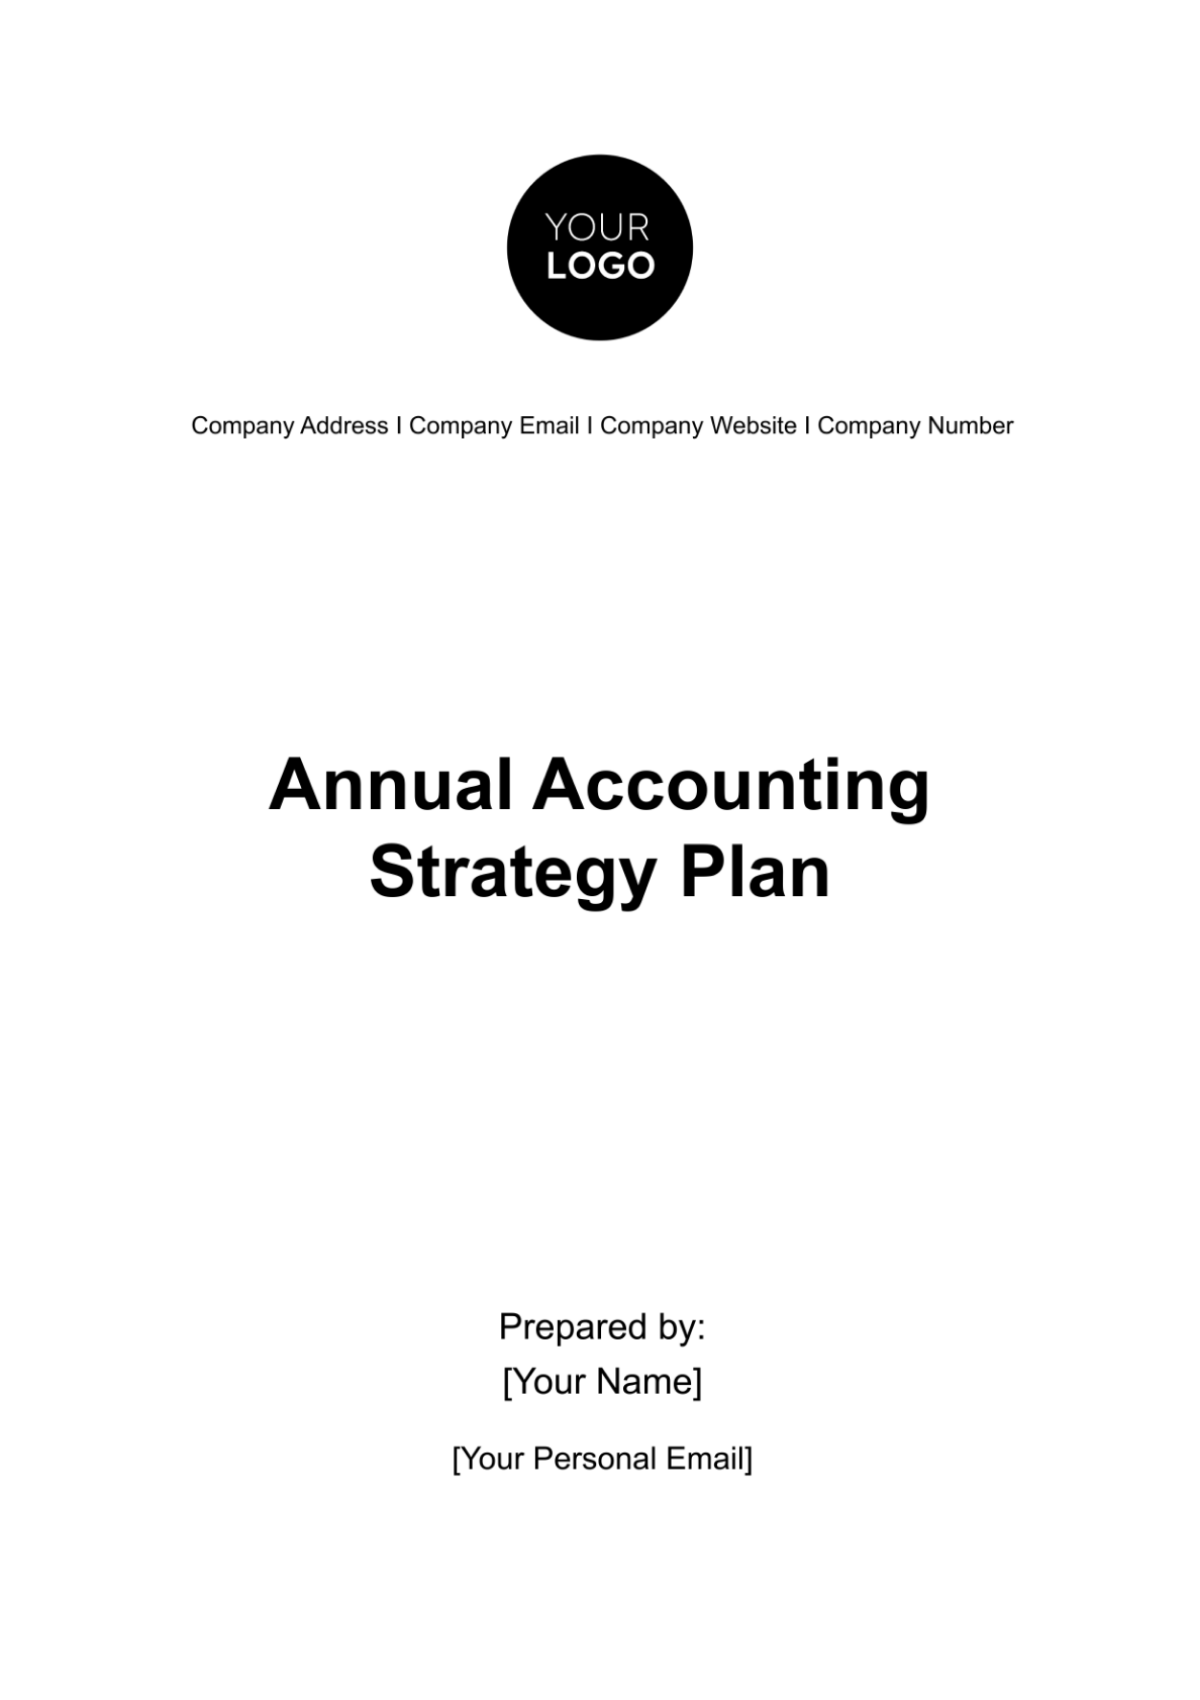 Annual Accounting Strategy Plan Template